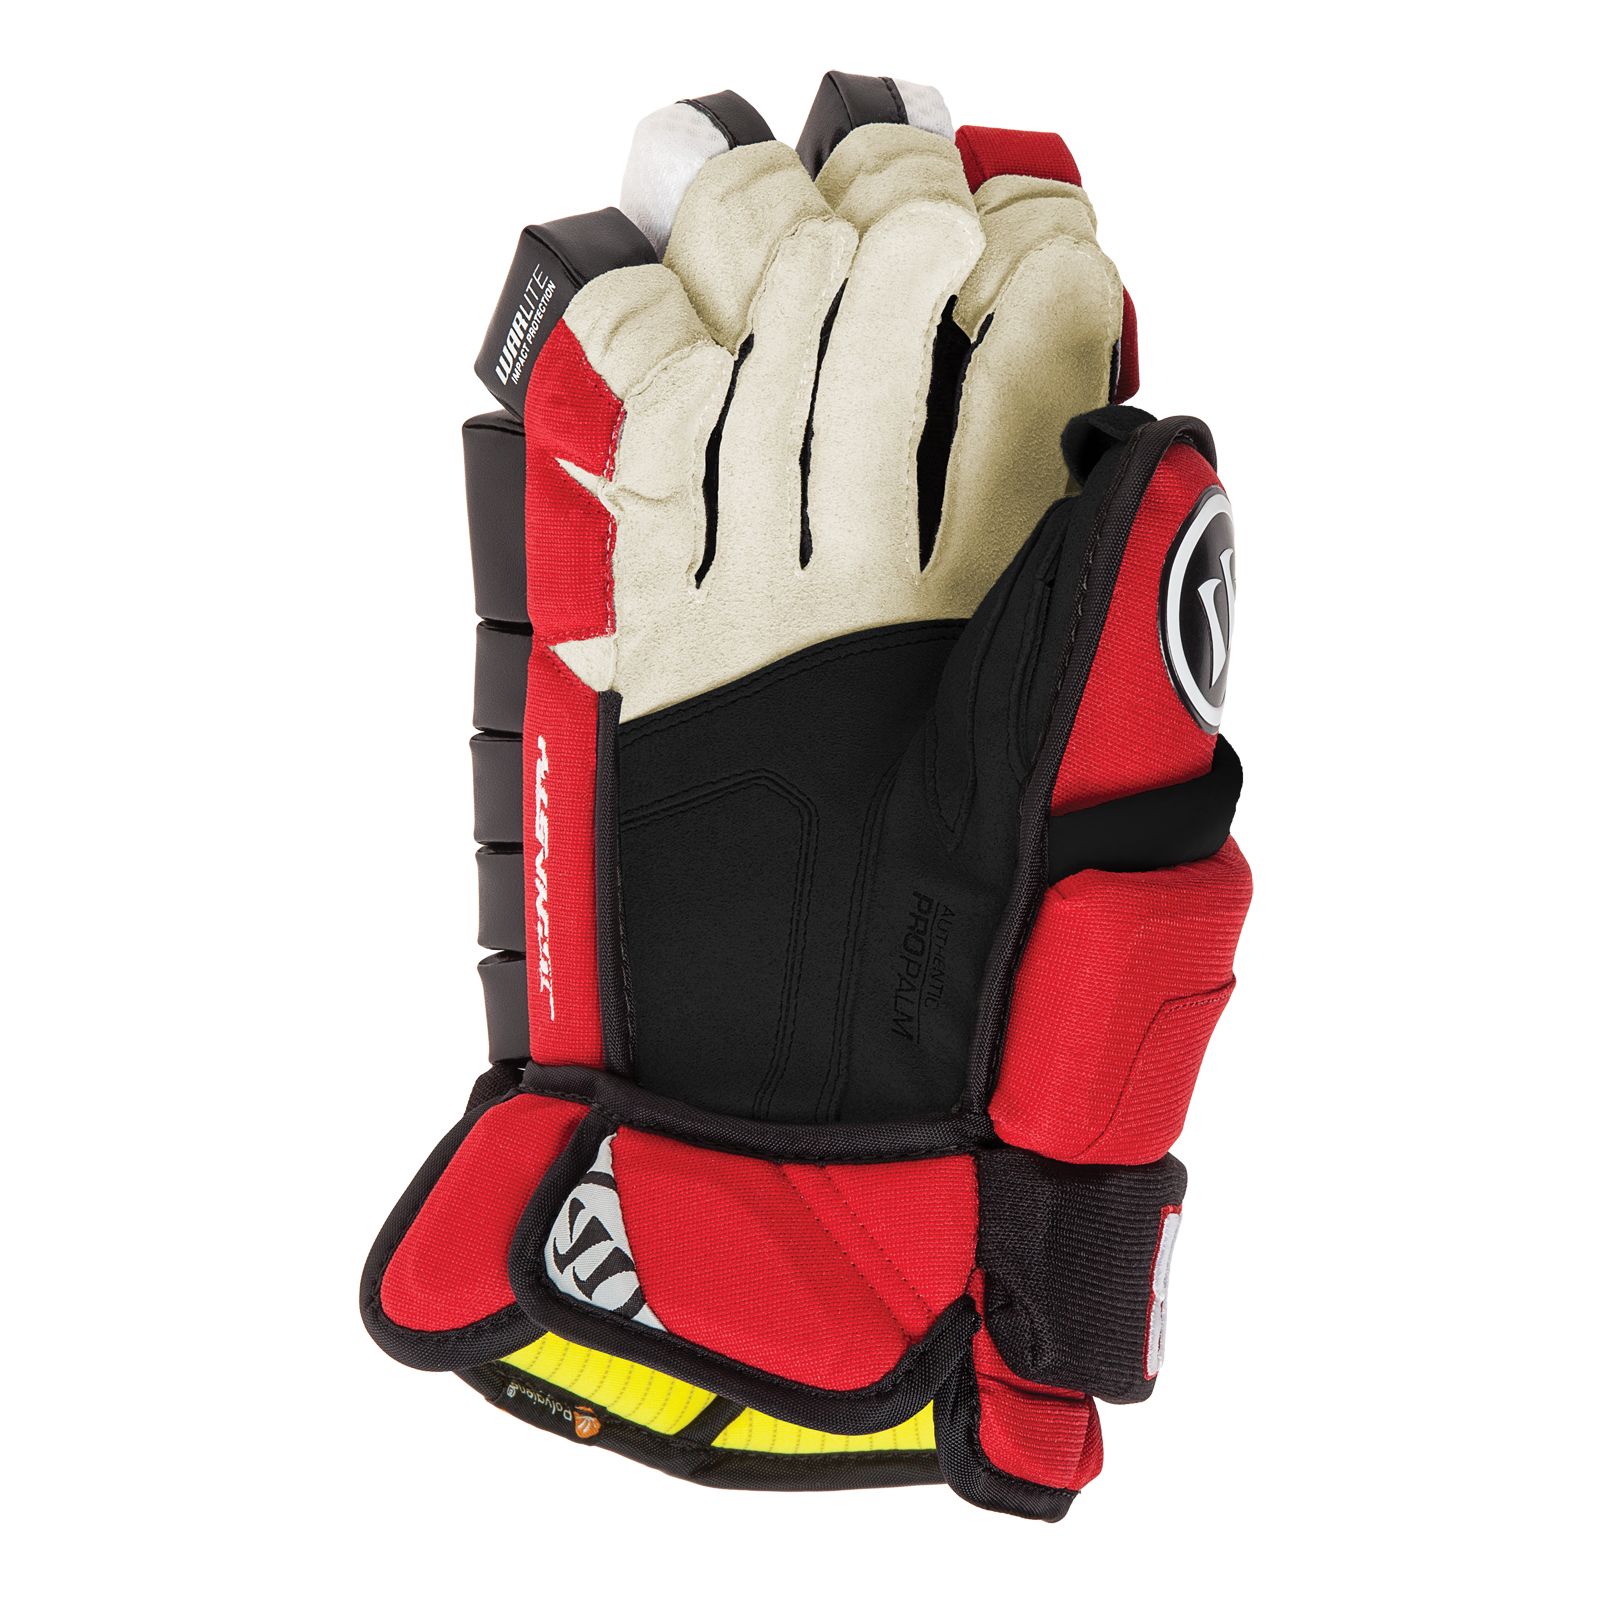 Dynasty AX2 Sr. Glove, Red with Black & White image number 1